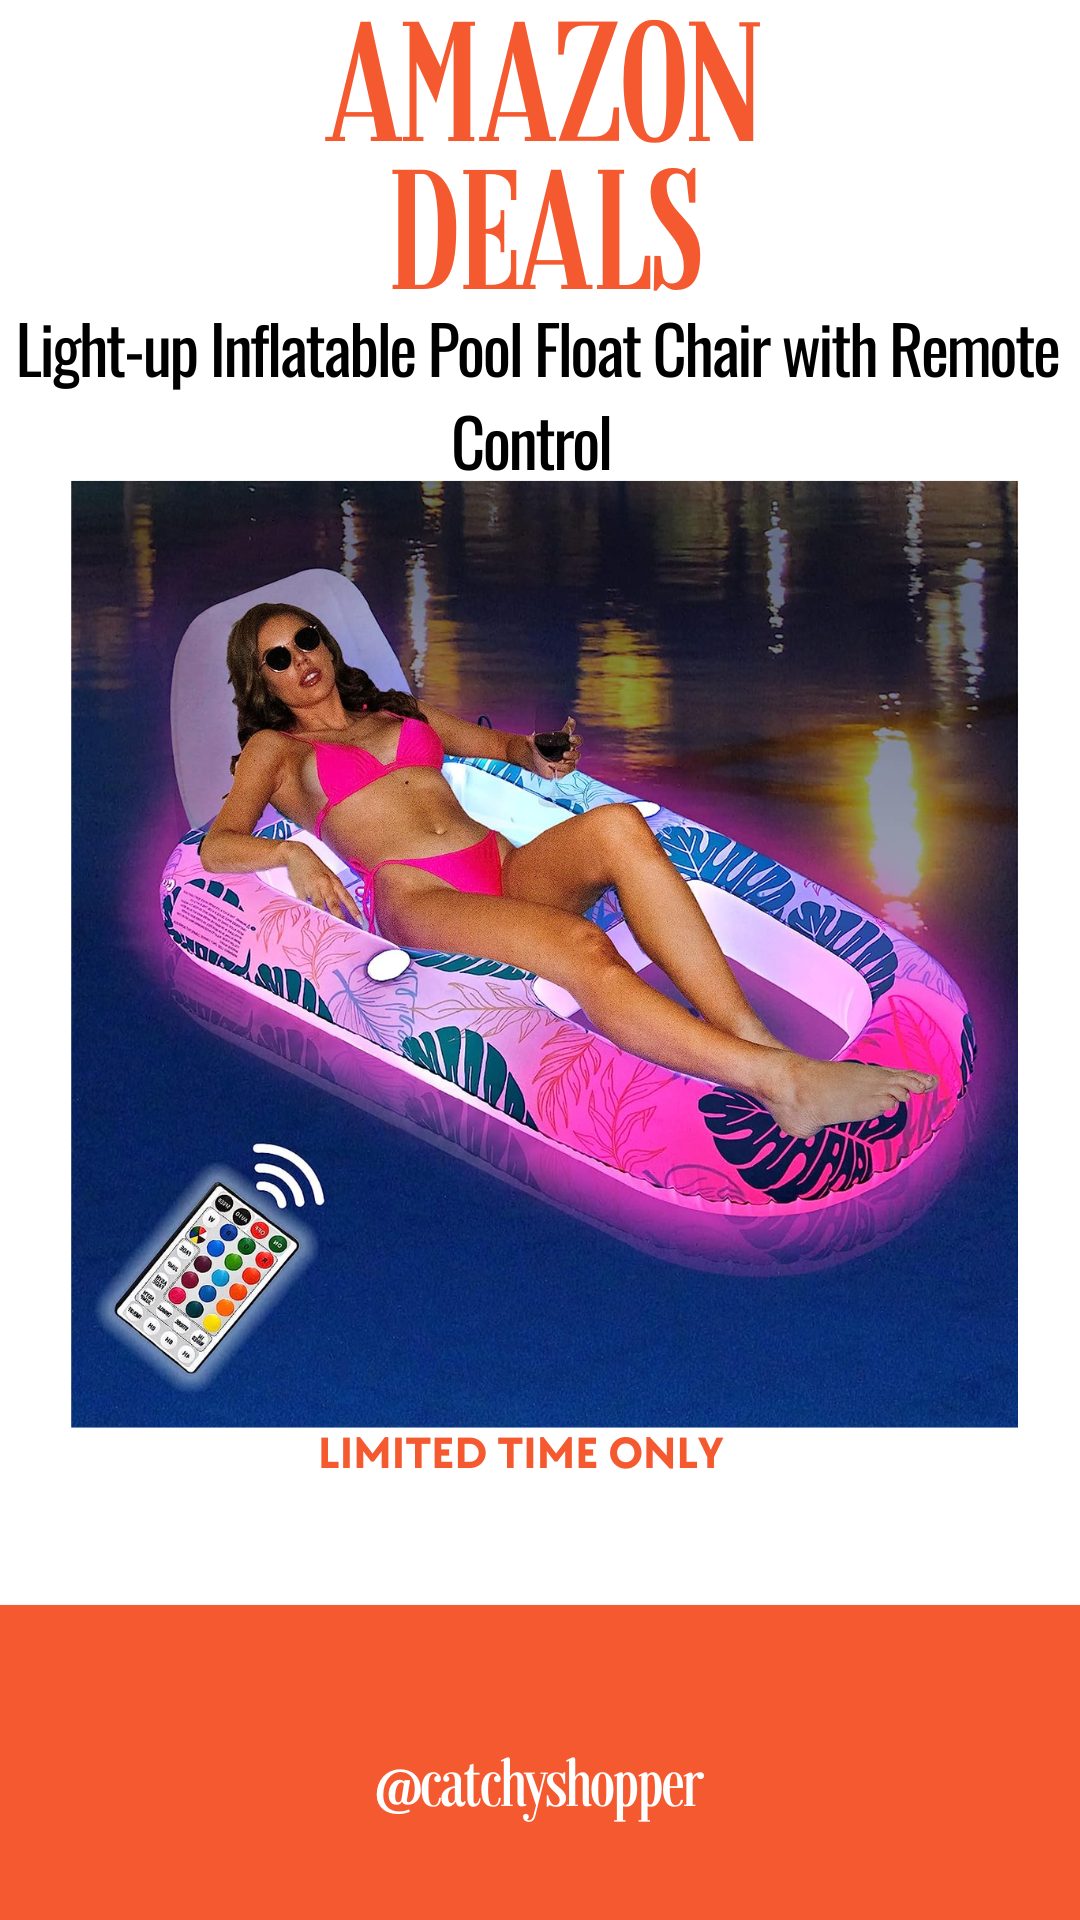 Light-up Inflatable Pool Float Chair with Remote Control